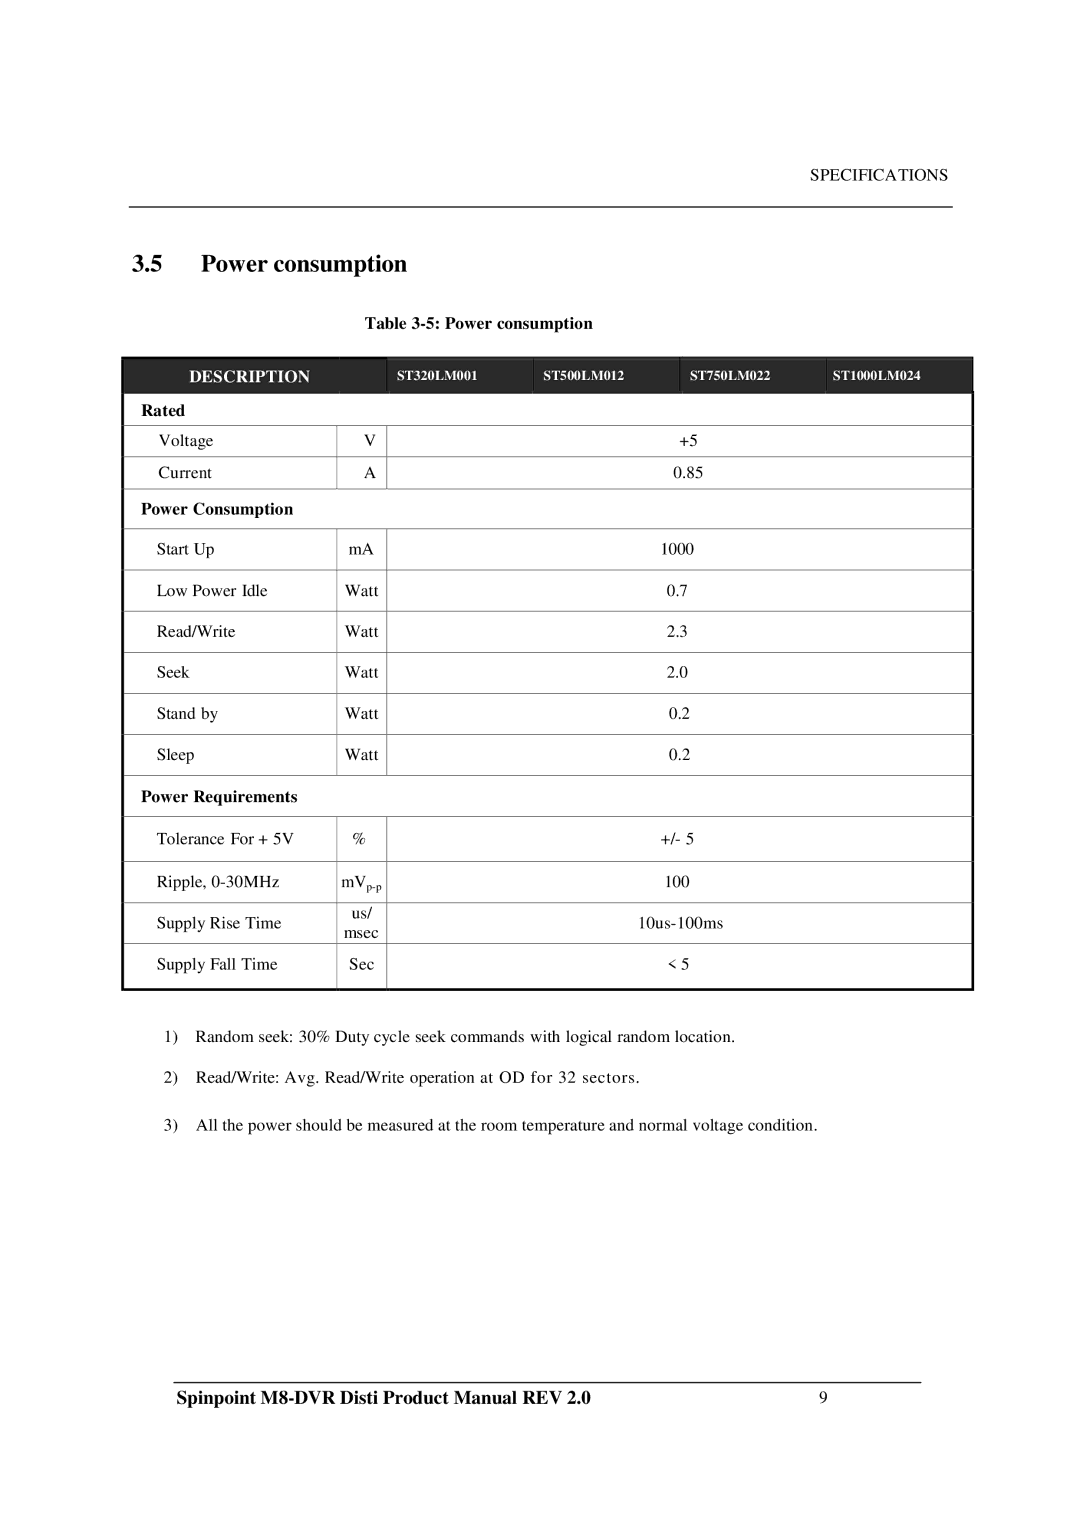 Samsung M8-DVR manual Power consumption, Rated, Power Requirements 